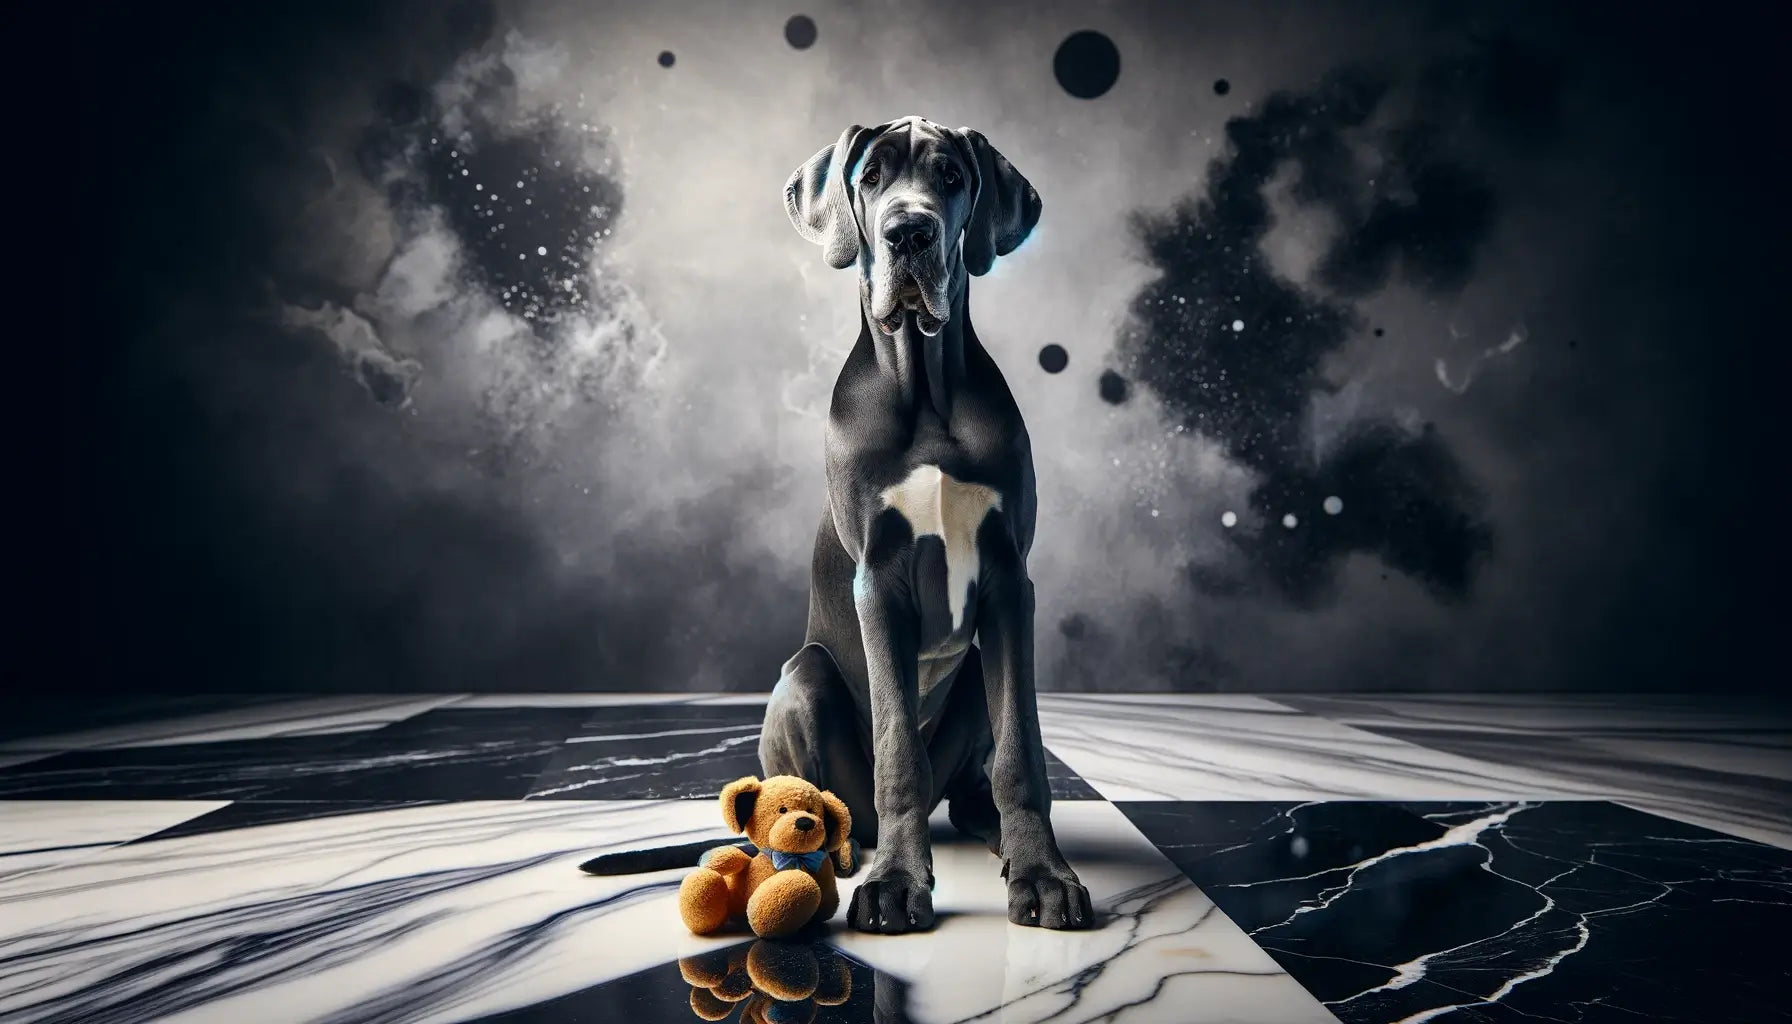 Blue Great Dane sitting upright on a marbled floor, with its tricolor fur enhanced by a black and white backdrop, a plush toy adding charm.